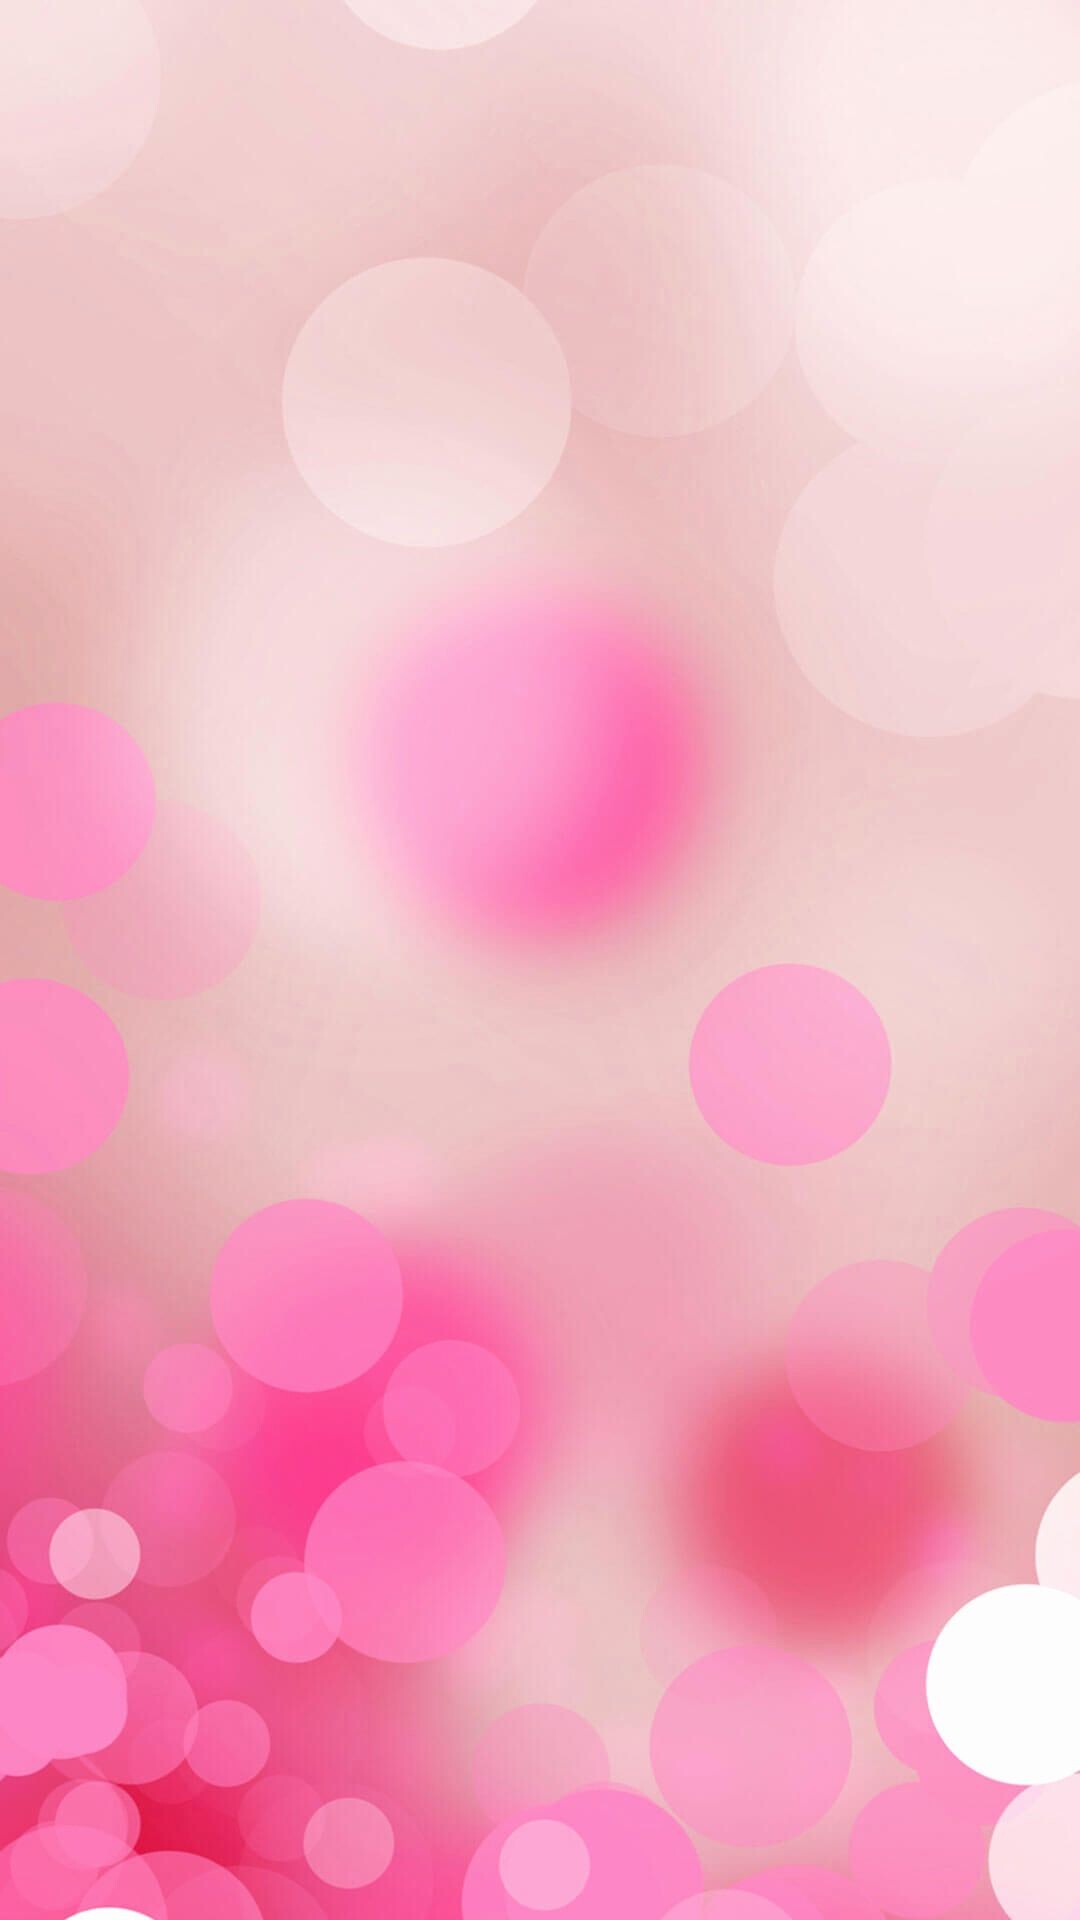 Girly: Bubble gum, Pink shiny ball, Multicolored circles, Tints and shades. 1080x1920 Full HD Wallpaper.